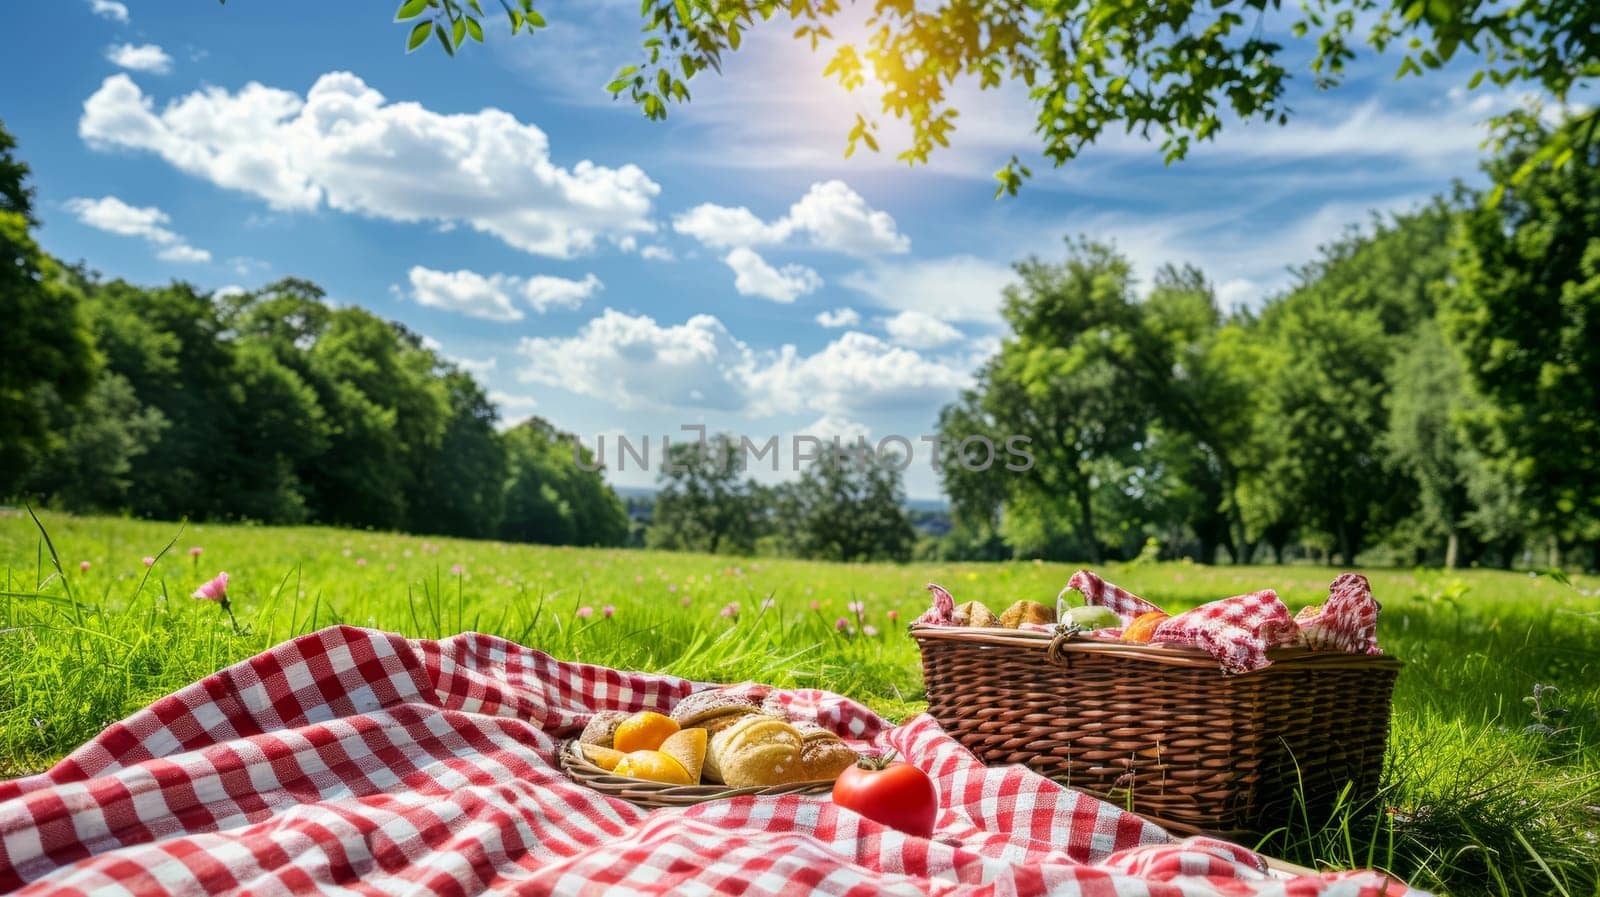 A beautifully arranged picnic on a gingham blanket in the countryside, offering a tranquil spot to enjoy a sunny day outdoors. by sfinks